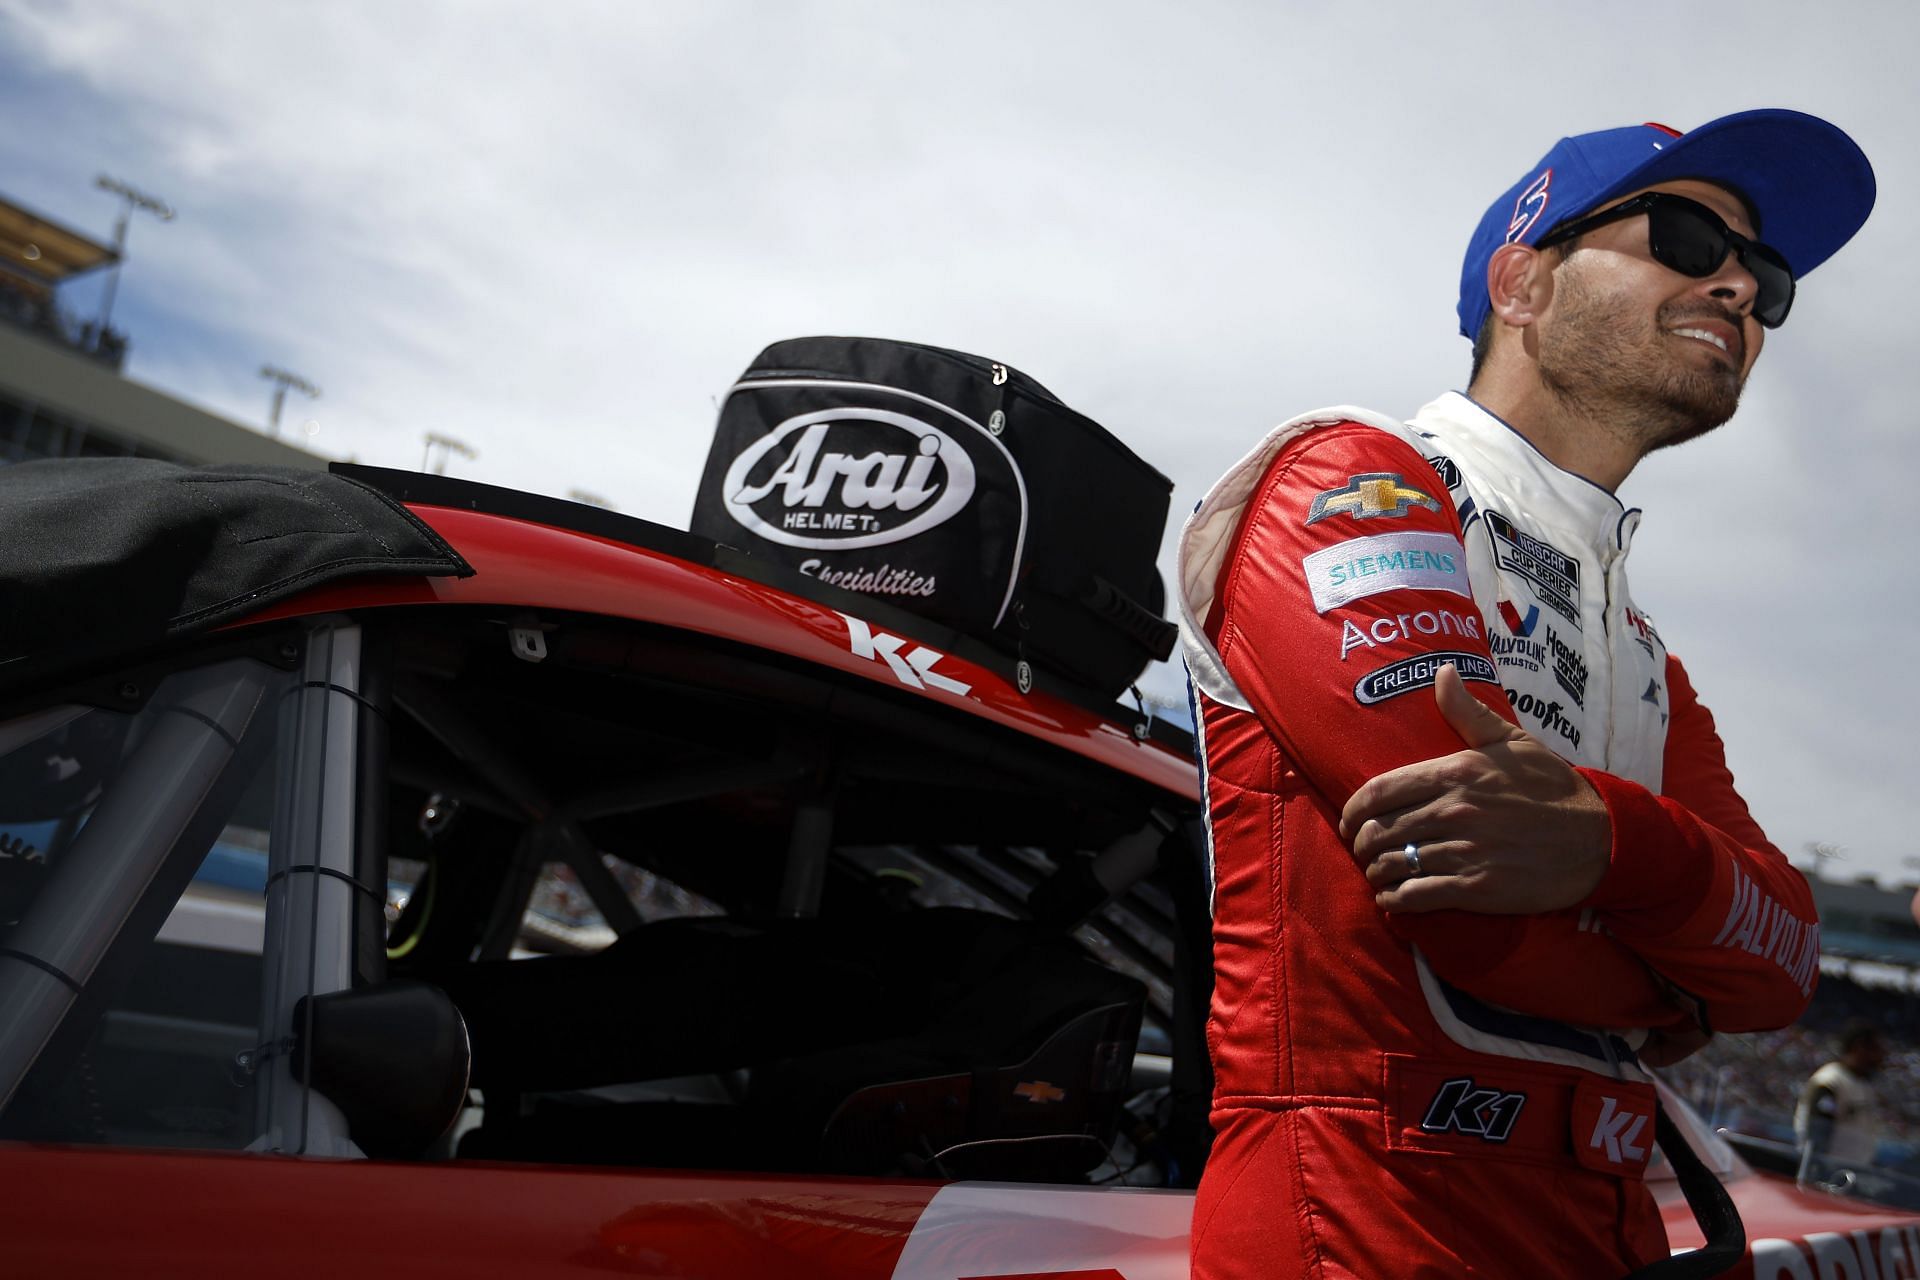 Kyle Larson, driver of the #5 Valvoline Chevrolet, stands on the grid before the Ruoff Mortgage 500 at Phoenix Raceway